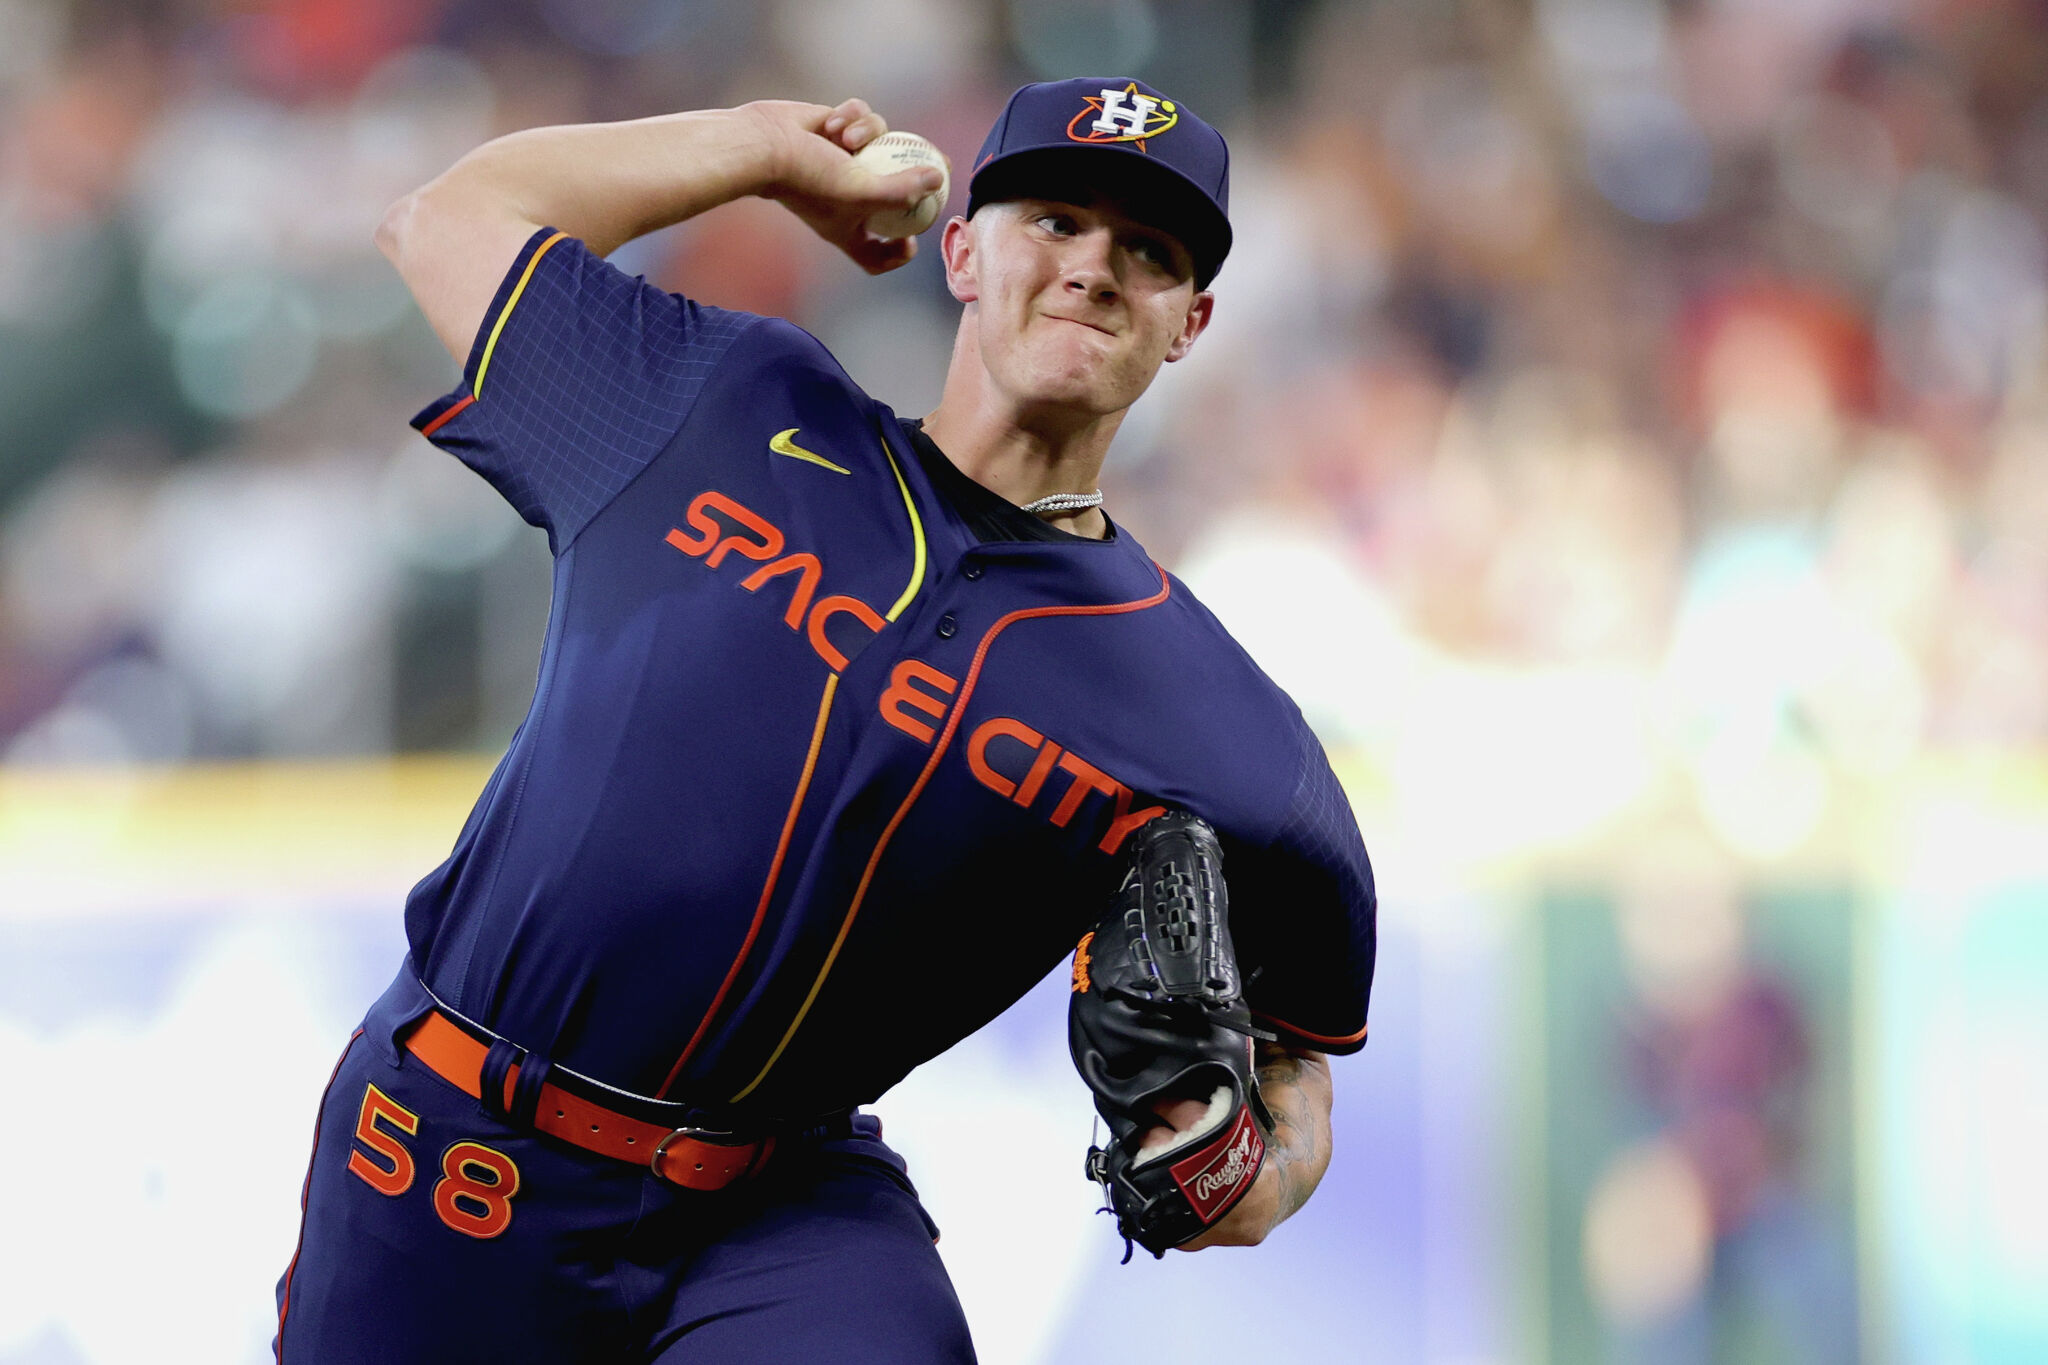 Astros pitcher raised on baseball in Tampa